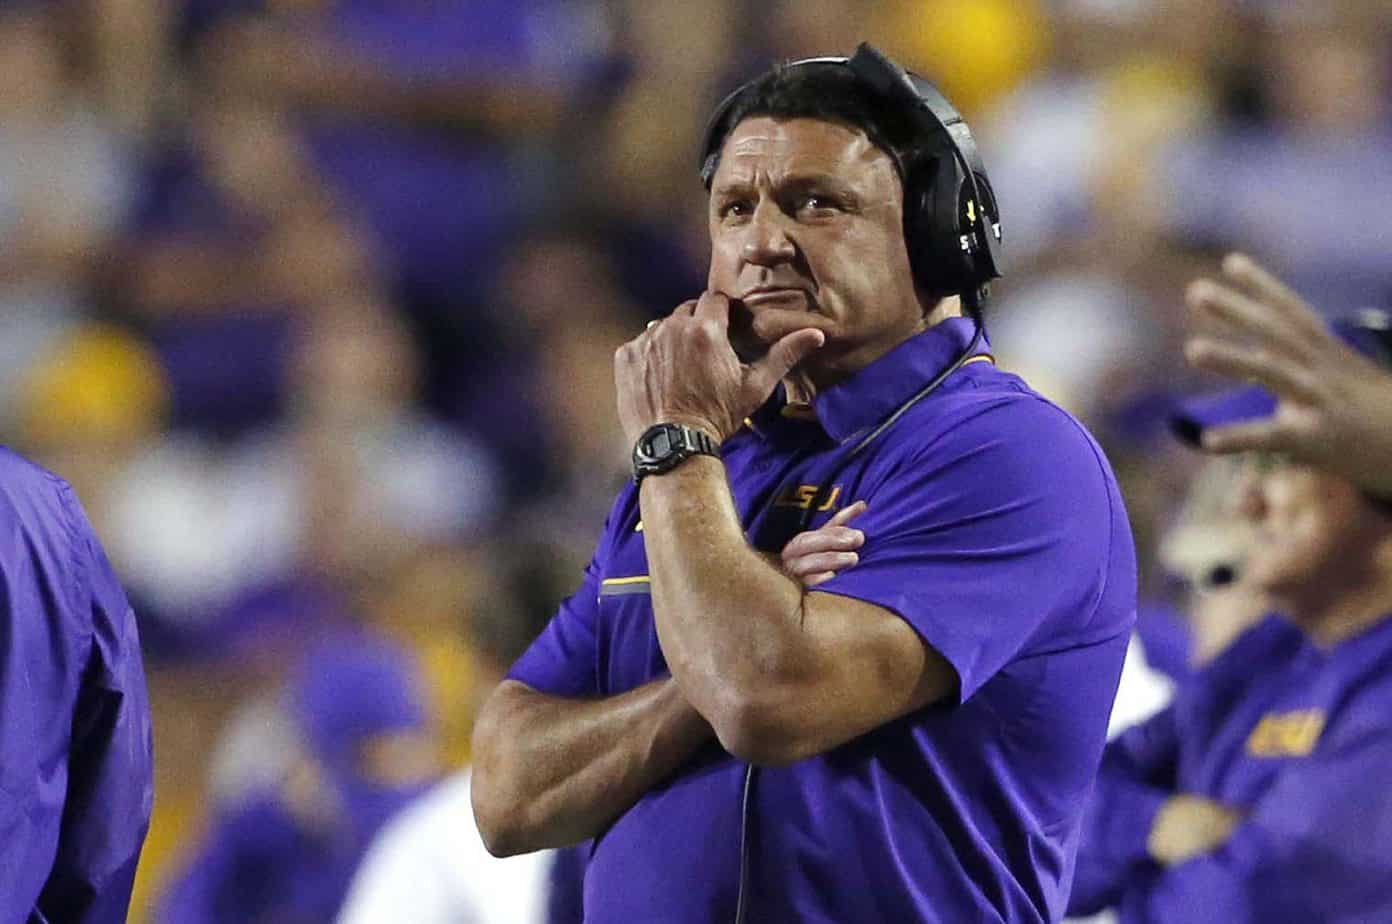 According to reports, Coach O would invite his girlfriends to LSU practices, and even let their kids participate in team drills